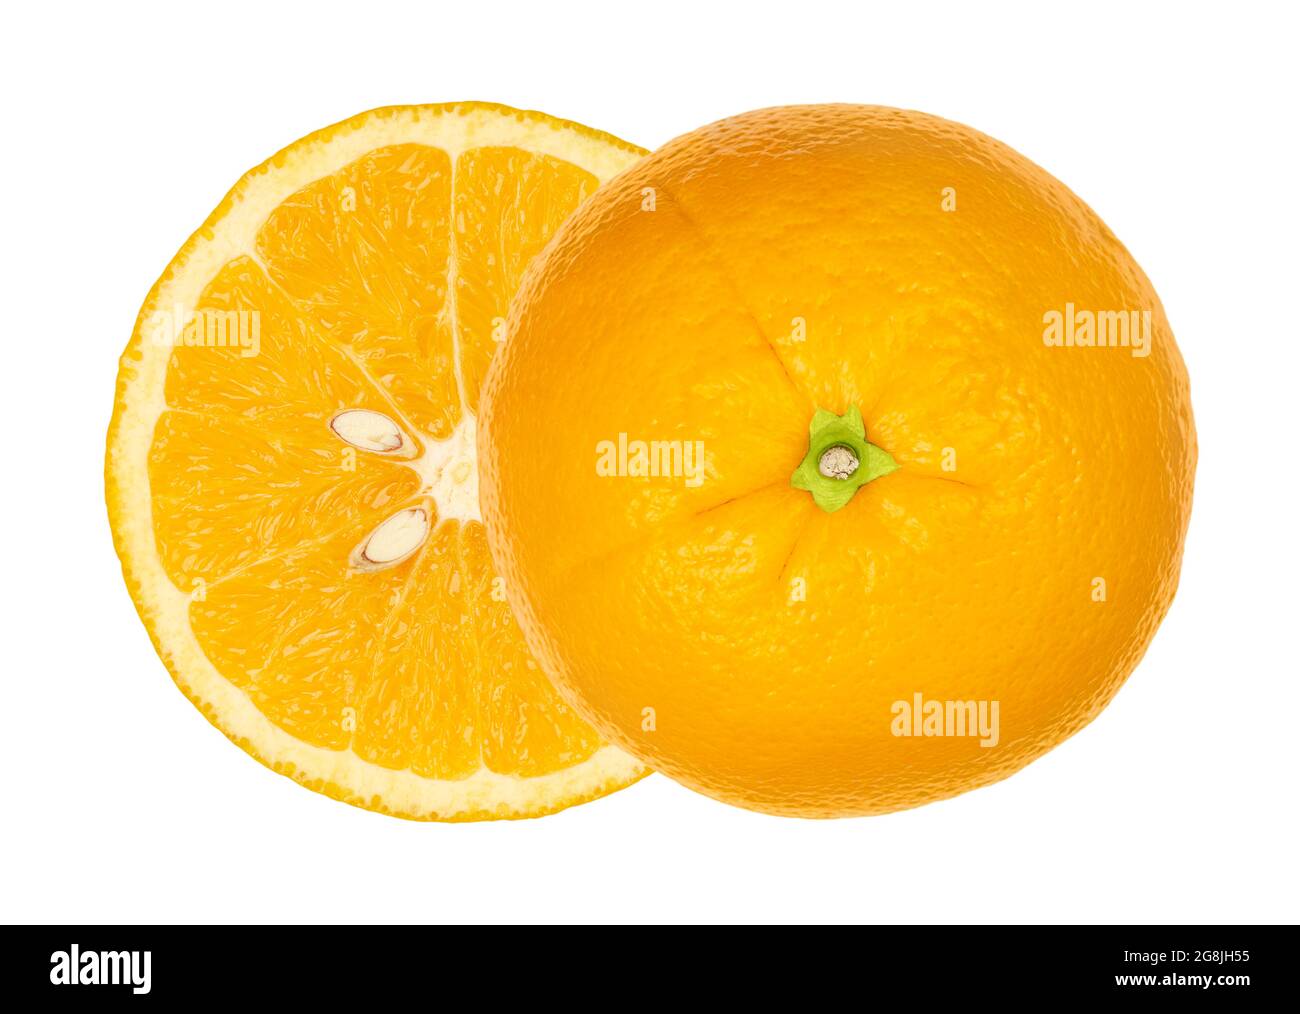 Two orange halves, from above, isolated over white. Ripe fresh orange cut in half, both halves laterally offset, with cross section. Stock Photo